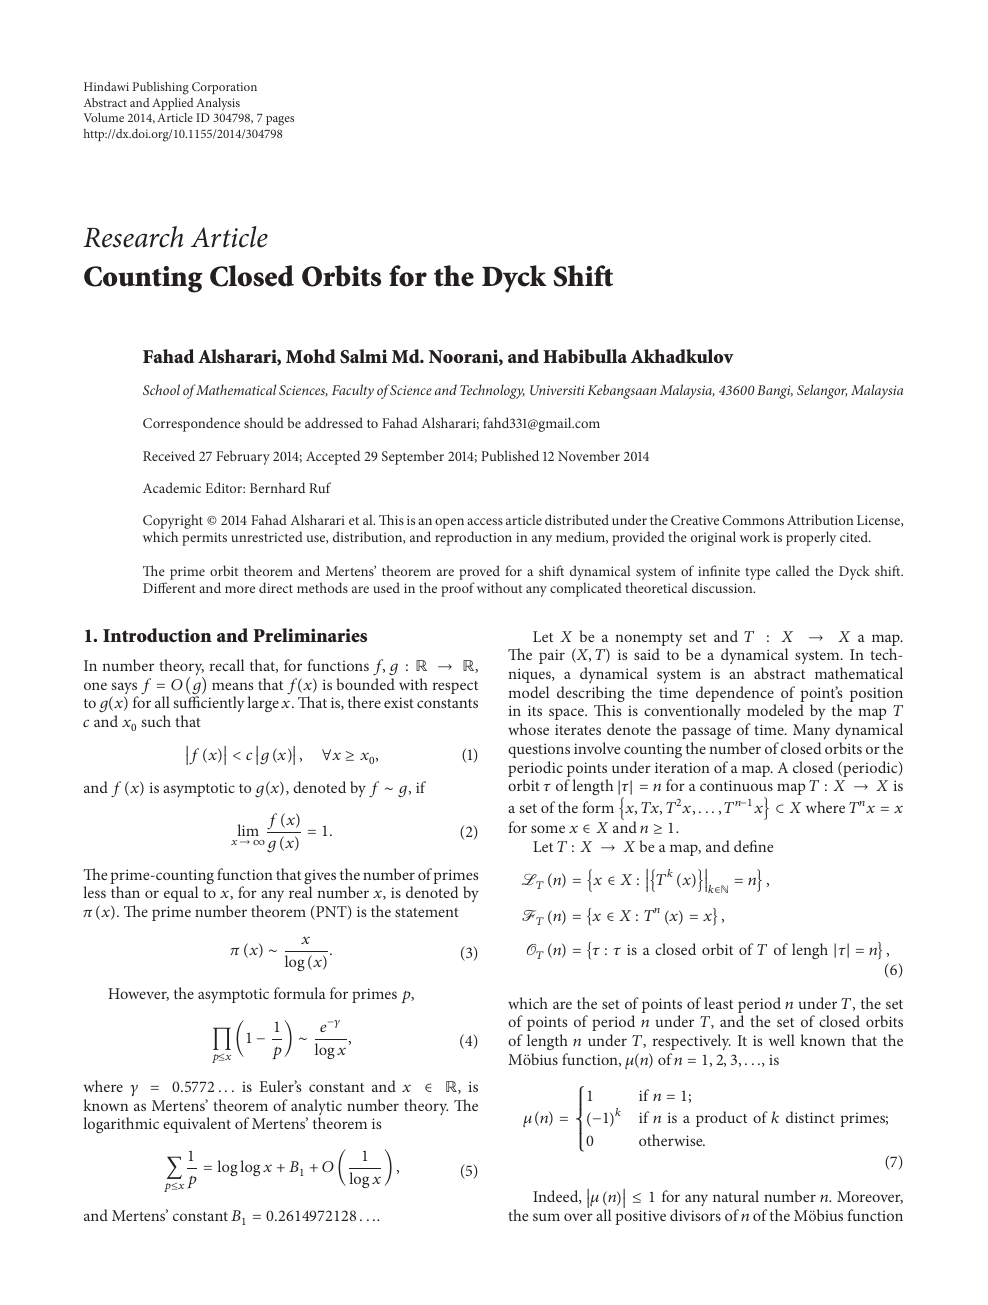 Counting Closed Orbits For The Dyck Shift Topic Of Research Paper In Mathematics Download Scholarly Article Pdf And Read For Free On Cyberleninka Open Science Hub